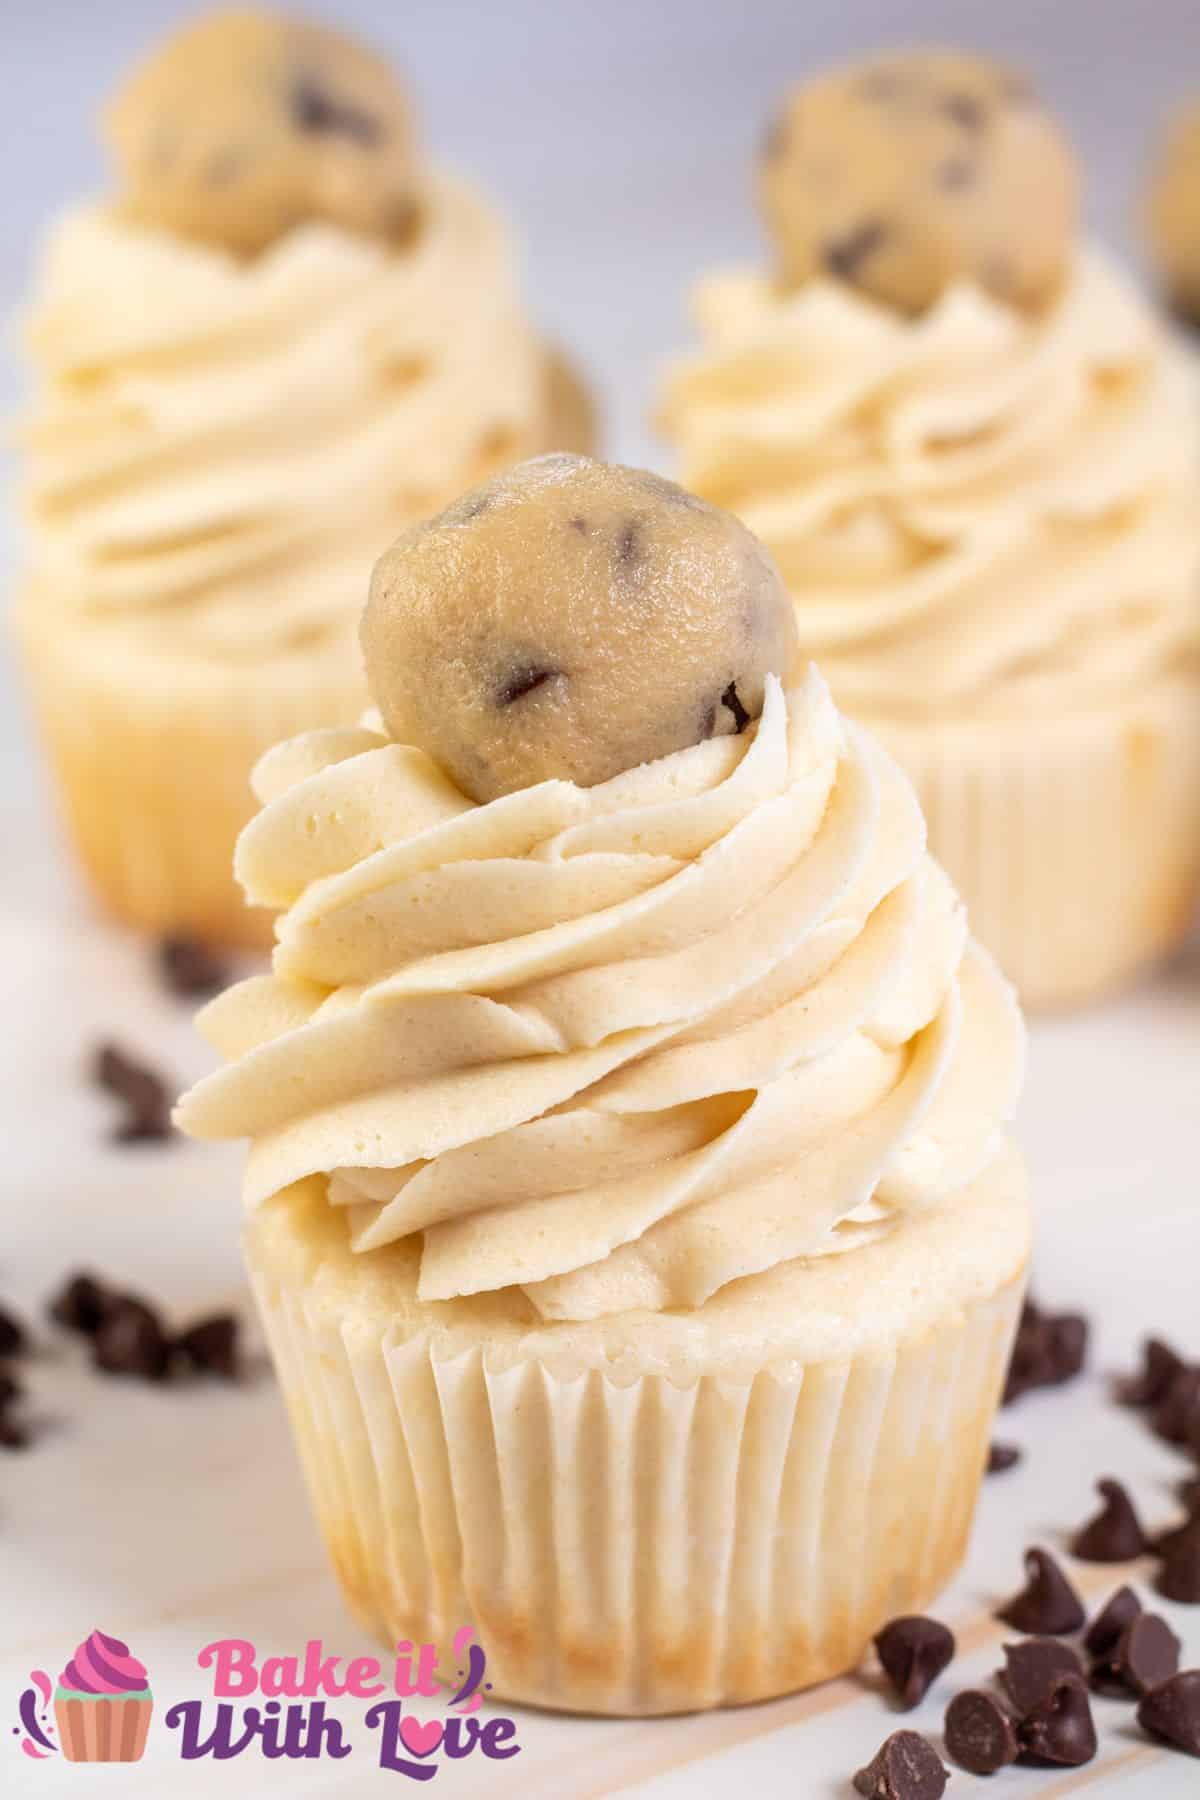 Tall image showing a cupcake with cookie dough buttercream frosting.